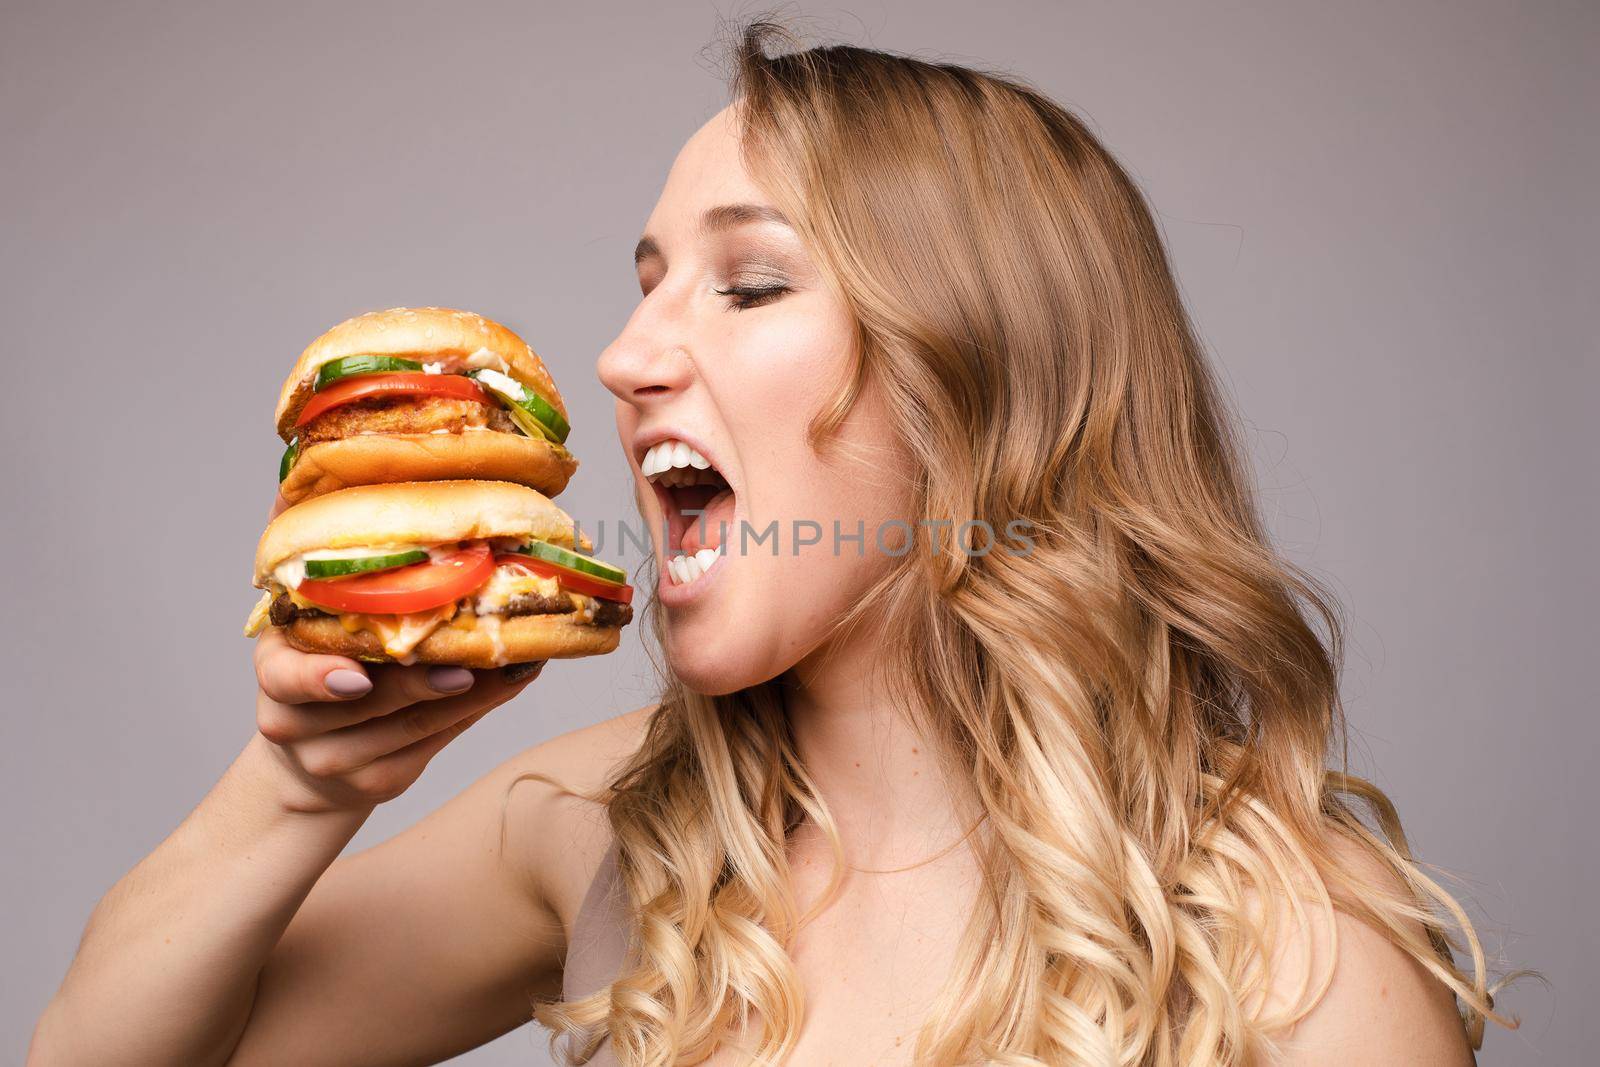 girl with a burger in his hands opened her mouse to eat a big portion of hamburger